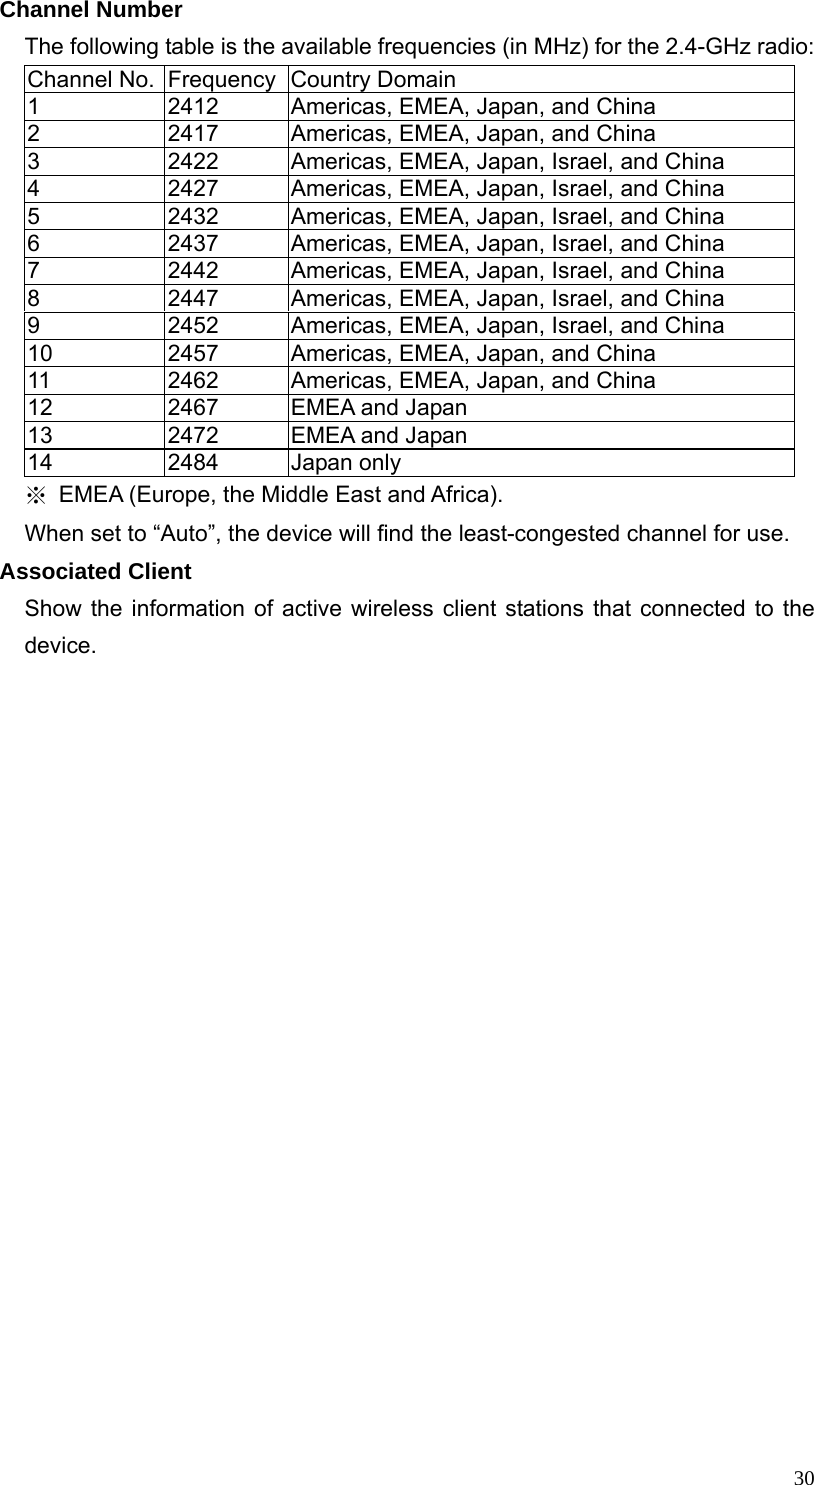  30Channel Number The following table is the available frequencies (in MHz) for the 2.4-GHz radio:   Channel No.  Frequency Country Domain 1  2412  Americas, EMEA, Japan, and China 2  2417  Americas, EMEA, Japan, and China 3  2422  Americas, EMEA, Japan, Israel, and China 4  2427  Americas, EMEA, Japan, Israel, and China 5  2432  Americas, EMEA, Japan, Israel, and China 6  2437  Americas, EMEA, Japan, Israel, and China 7  2442  Americas, EMEA, Japan, Israel, and China 8  2447  Americas, EMEA, Japan, Israel, and China 9  2452  Americas, EMEA, Japan, Israel, and China 10  2457  Americas, EMEA, Japan, and China 11  2462  Americas, EMEA, Japan, and China 12  2467  EMEA and Japan 13  2472  EMEA and Japan 14 2484 Japan only ※  EMEA (Europe, the Middle East and Africa). When set to “Auto”, the device will find the least-congested channel for use. Associated Client Show the information of active wireless client stations that connected to the device.                    